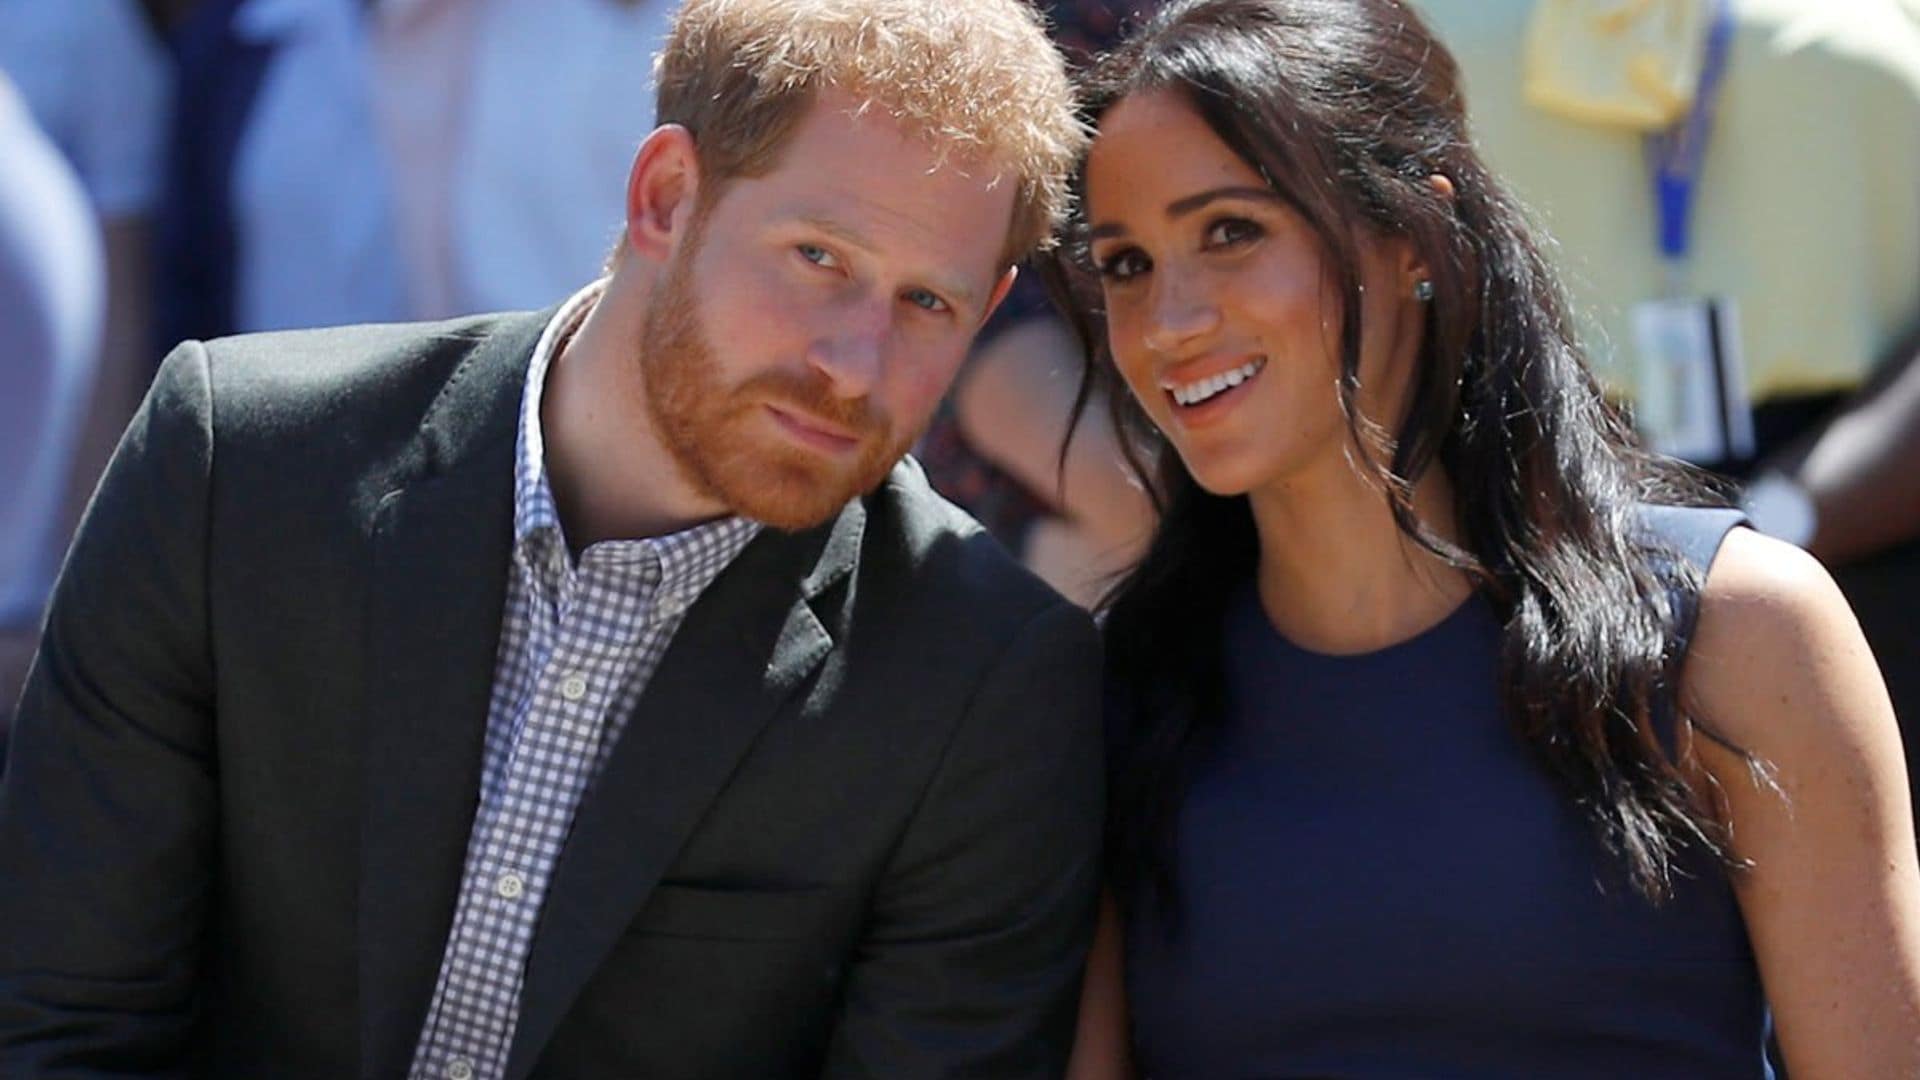 What Meghan and Harry thought about the palace's 'recollections may vary' statement: Report